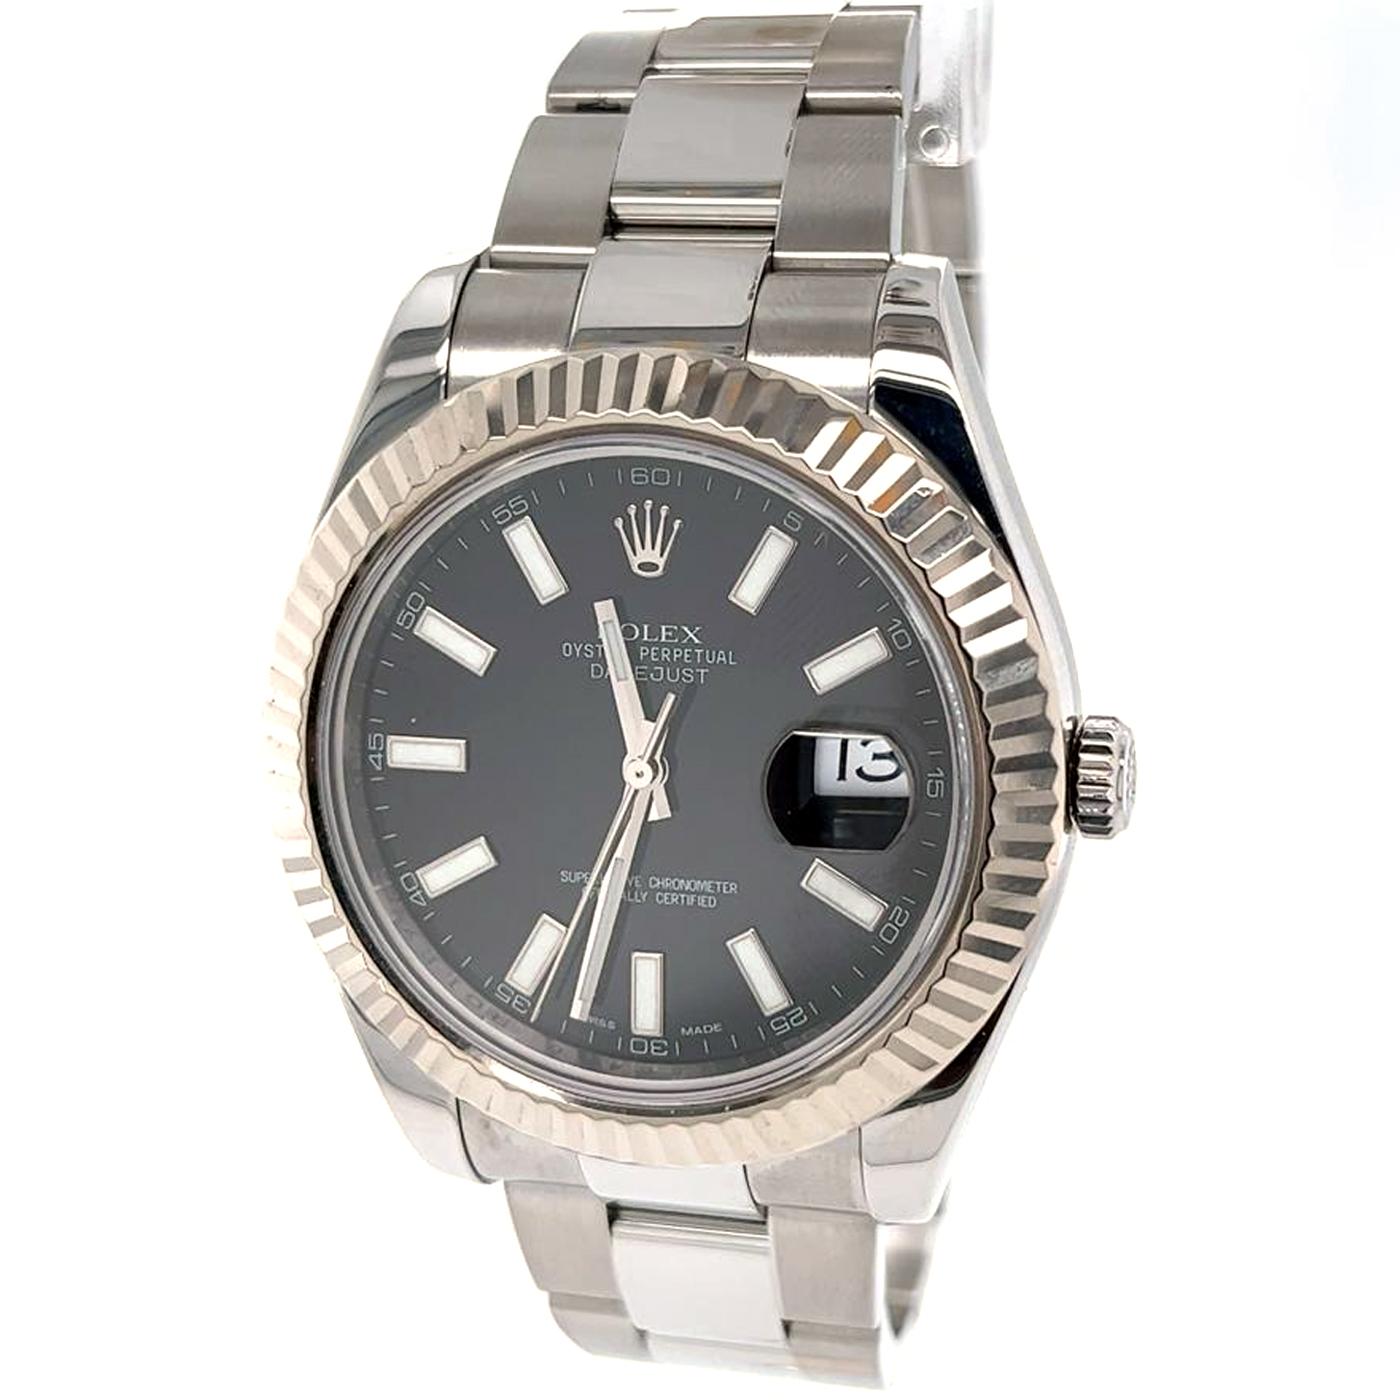 Rolex Datejust II Black Index Dial Fluted 18k White Gold Bezel has Stainless steel case with a stainless steel bracelet. Fluted 18k white gold bezel. Black dial with luminous silver-tone hands and stick hour markers, minute markers around the outer